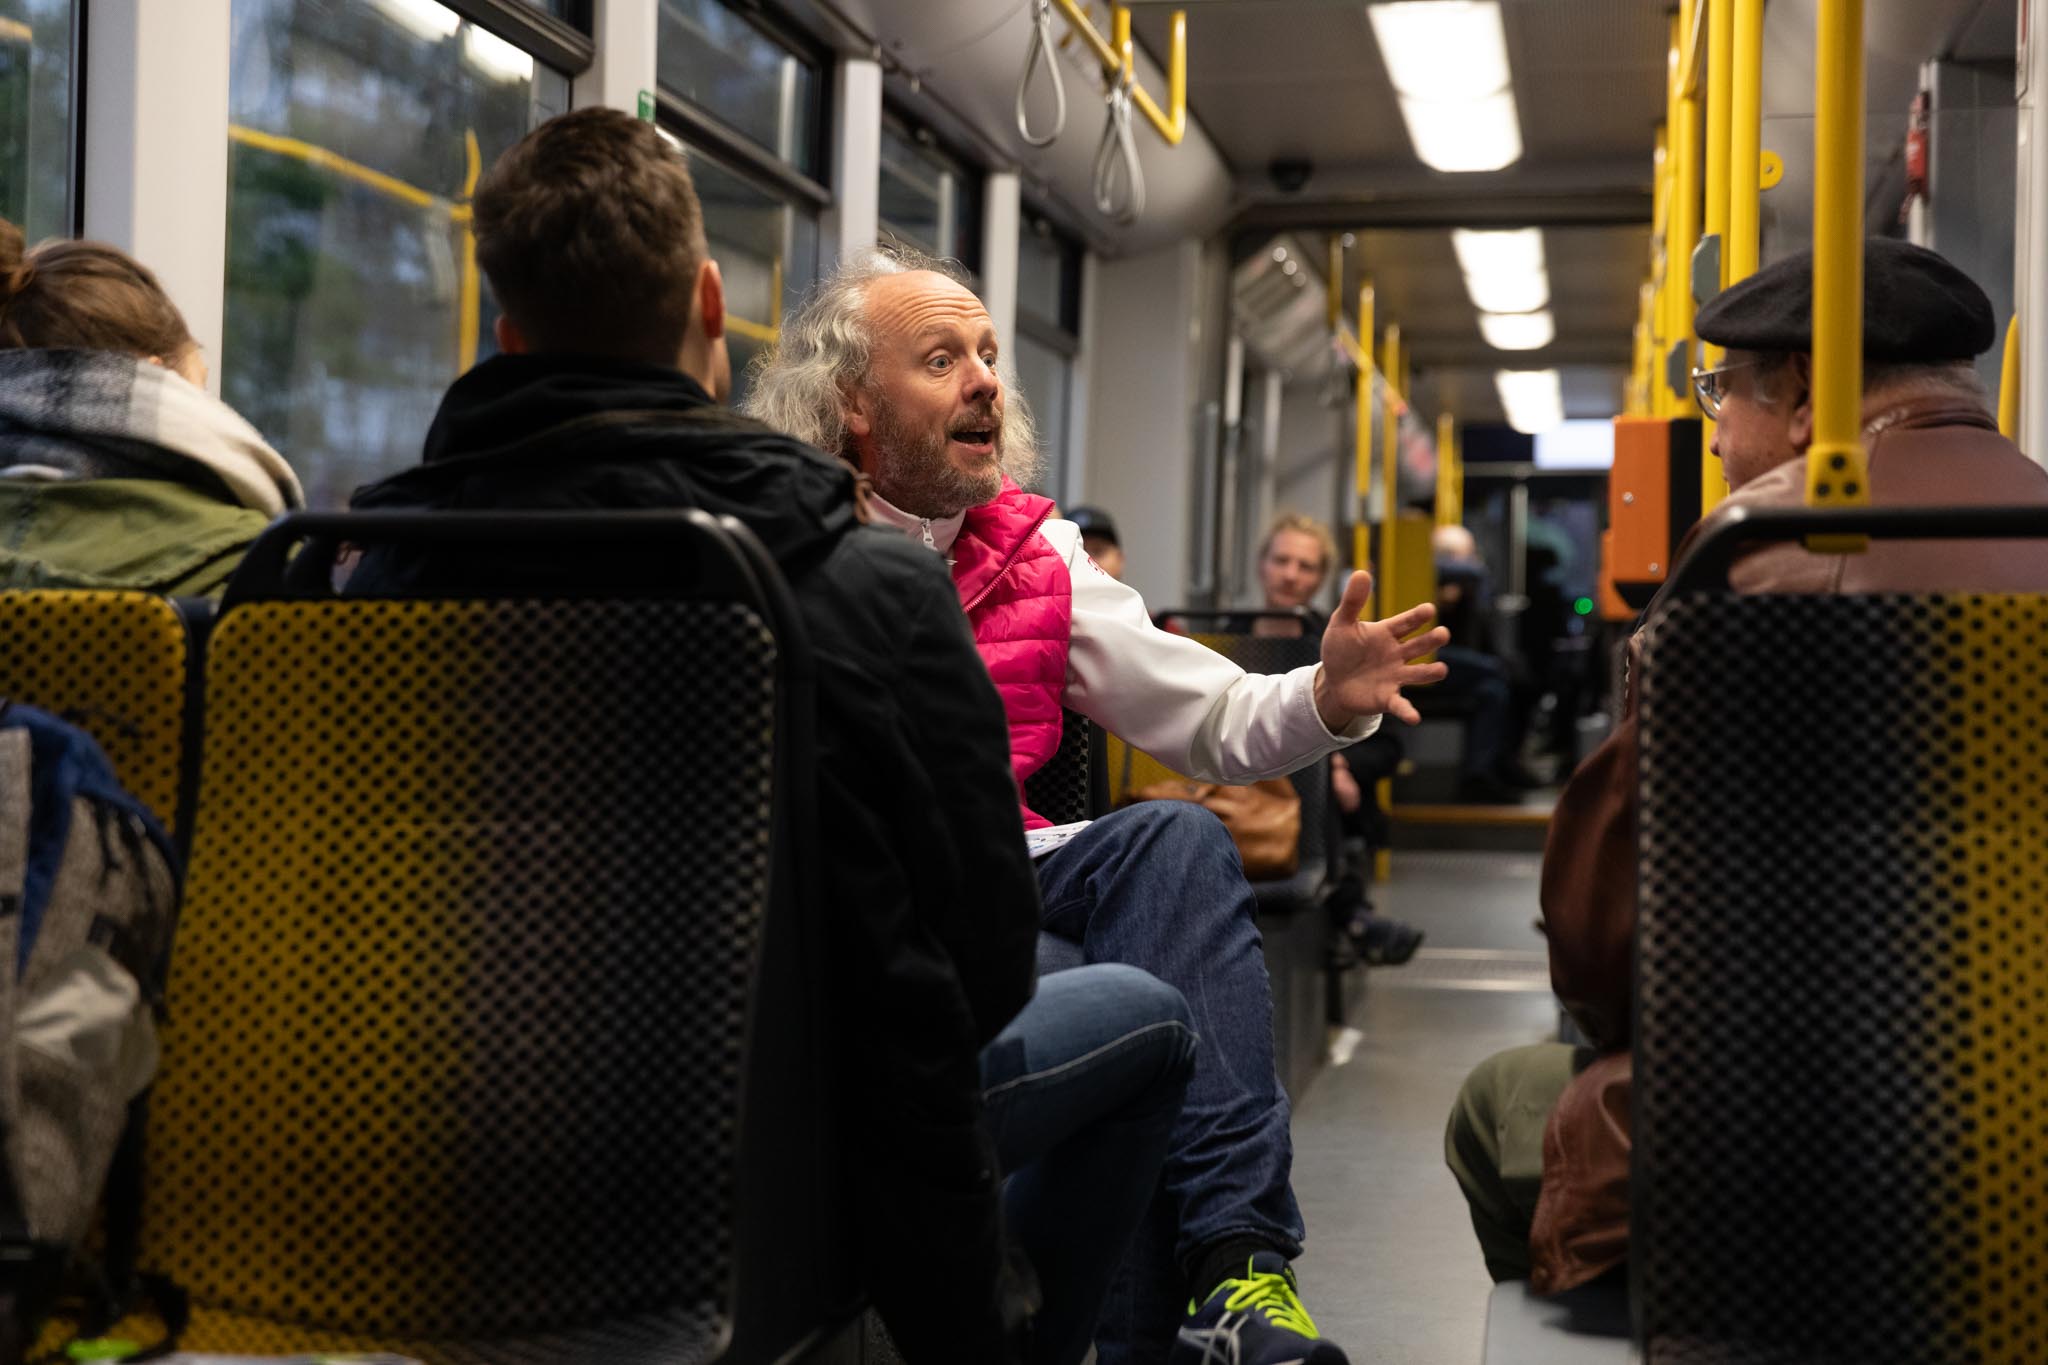 Picture of the Science Tram event - showing a man giving a presentation to others sitting around him on the tram